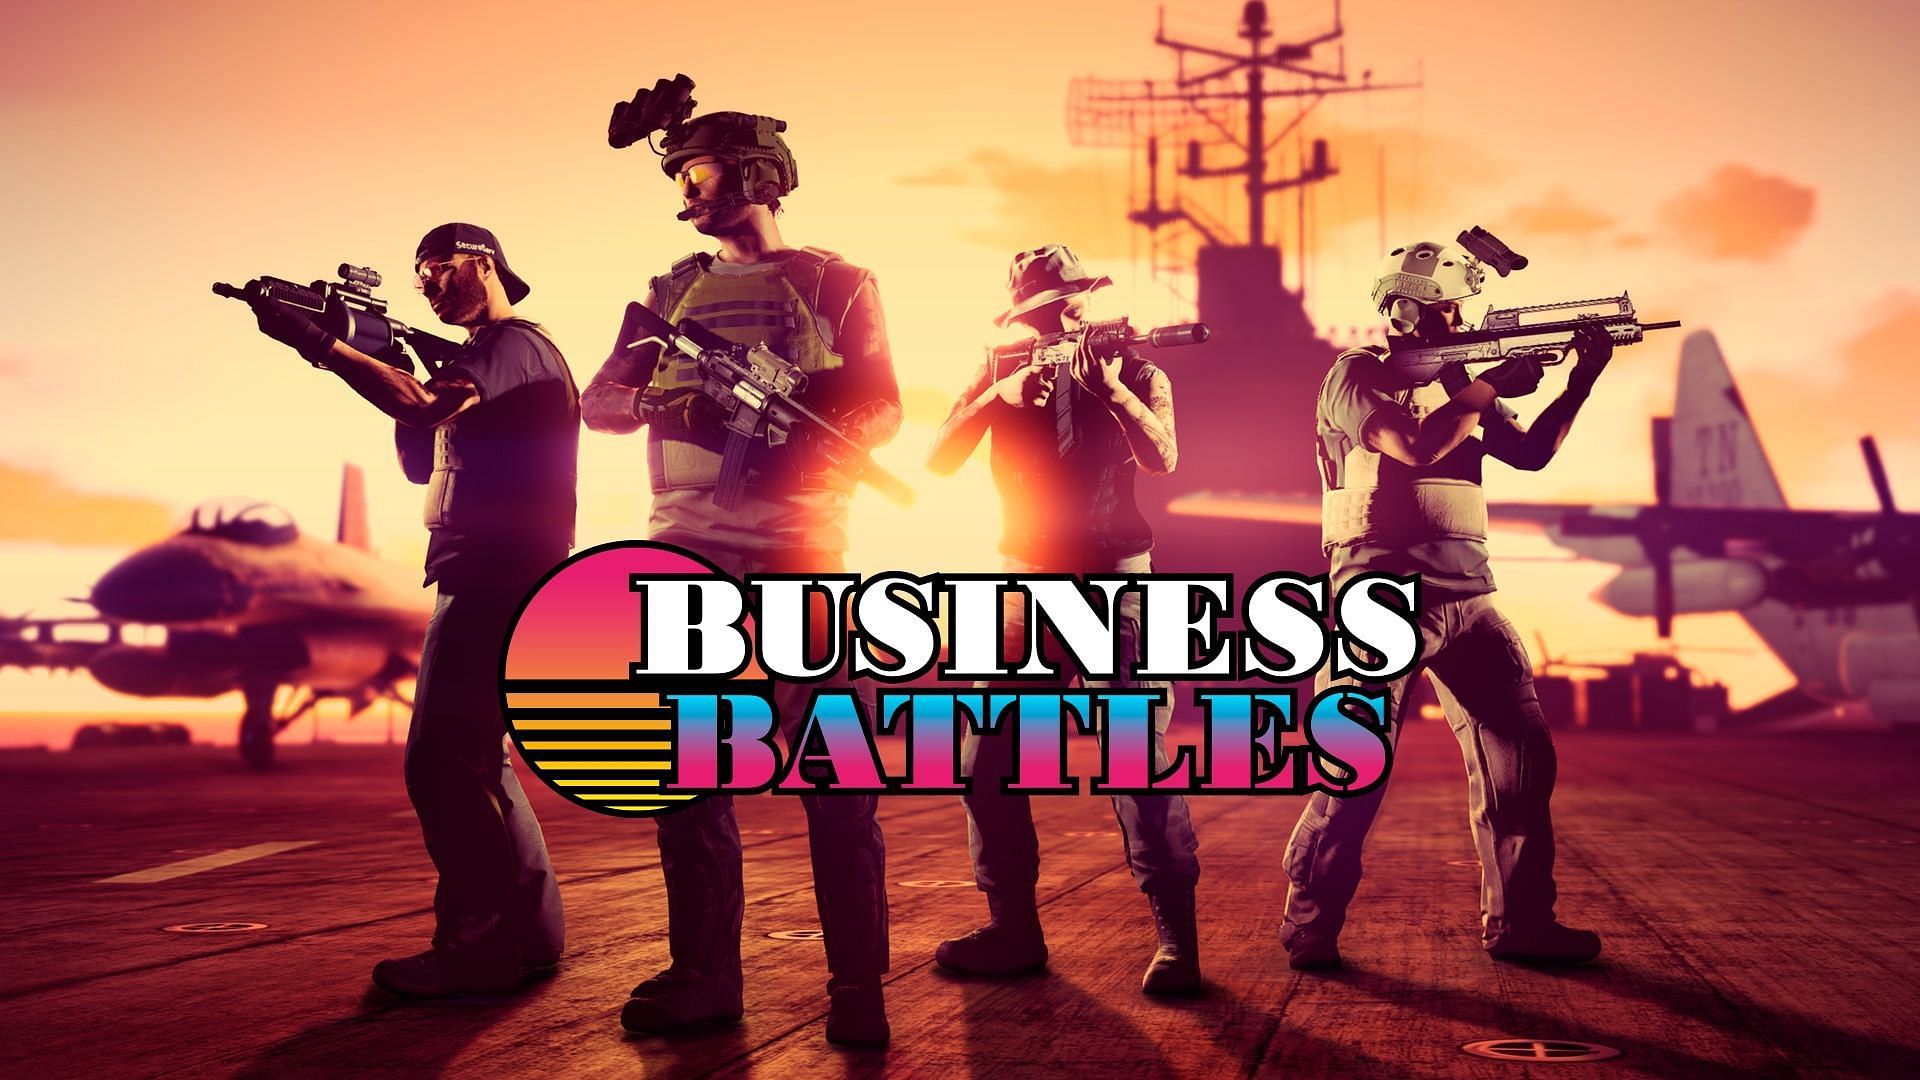 A brief guide about Business Battles in GTA Online for beginners (Image via Rockstar Games)